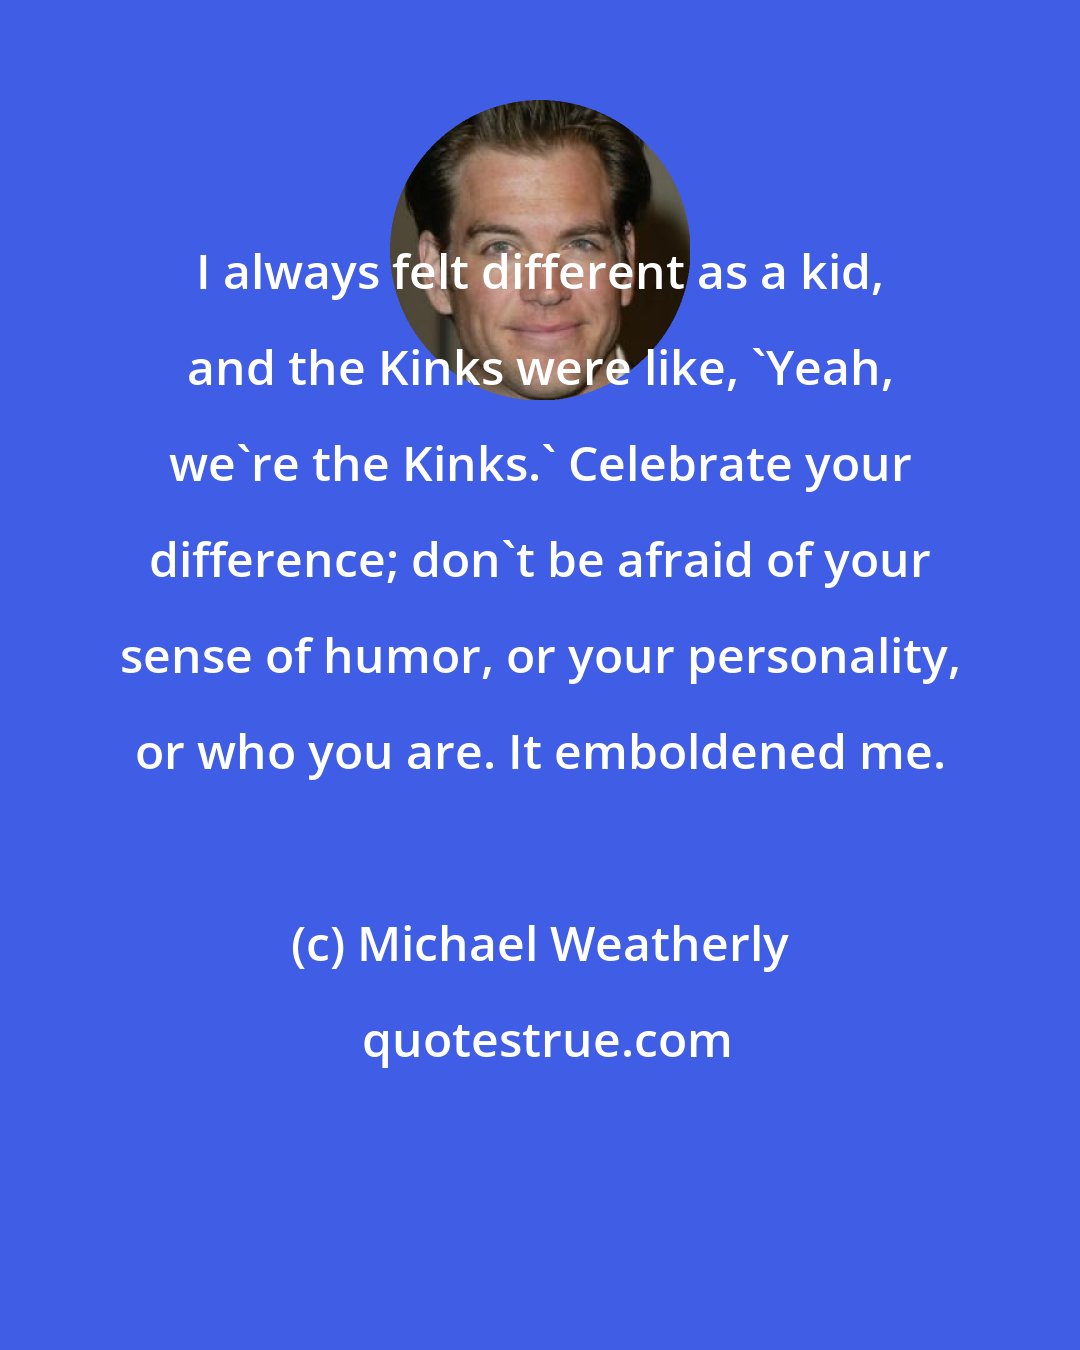 Michael Weatherly: I always felt different as a kid, and the Kinks were like, 'Yeah, we're the Kinks.' Celebrate your difference; don't be afraid of your sense of humor, or your personality, or who you are. It emboldened me.